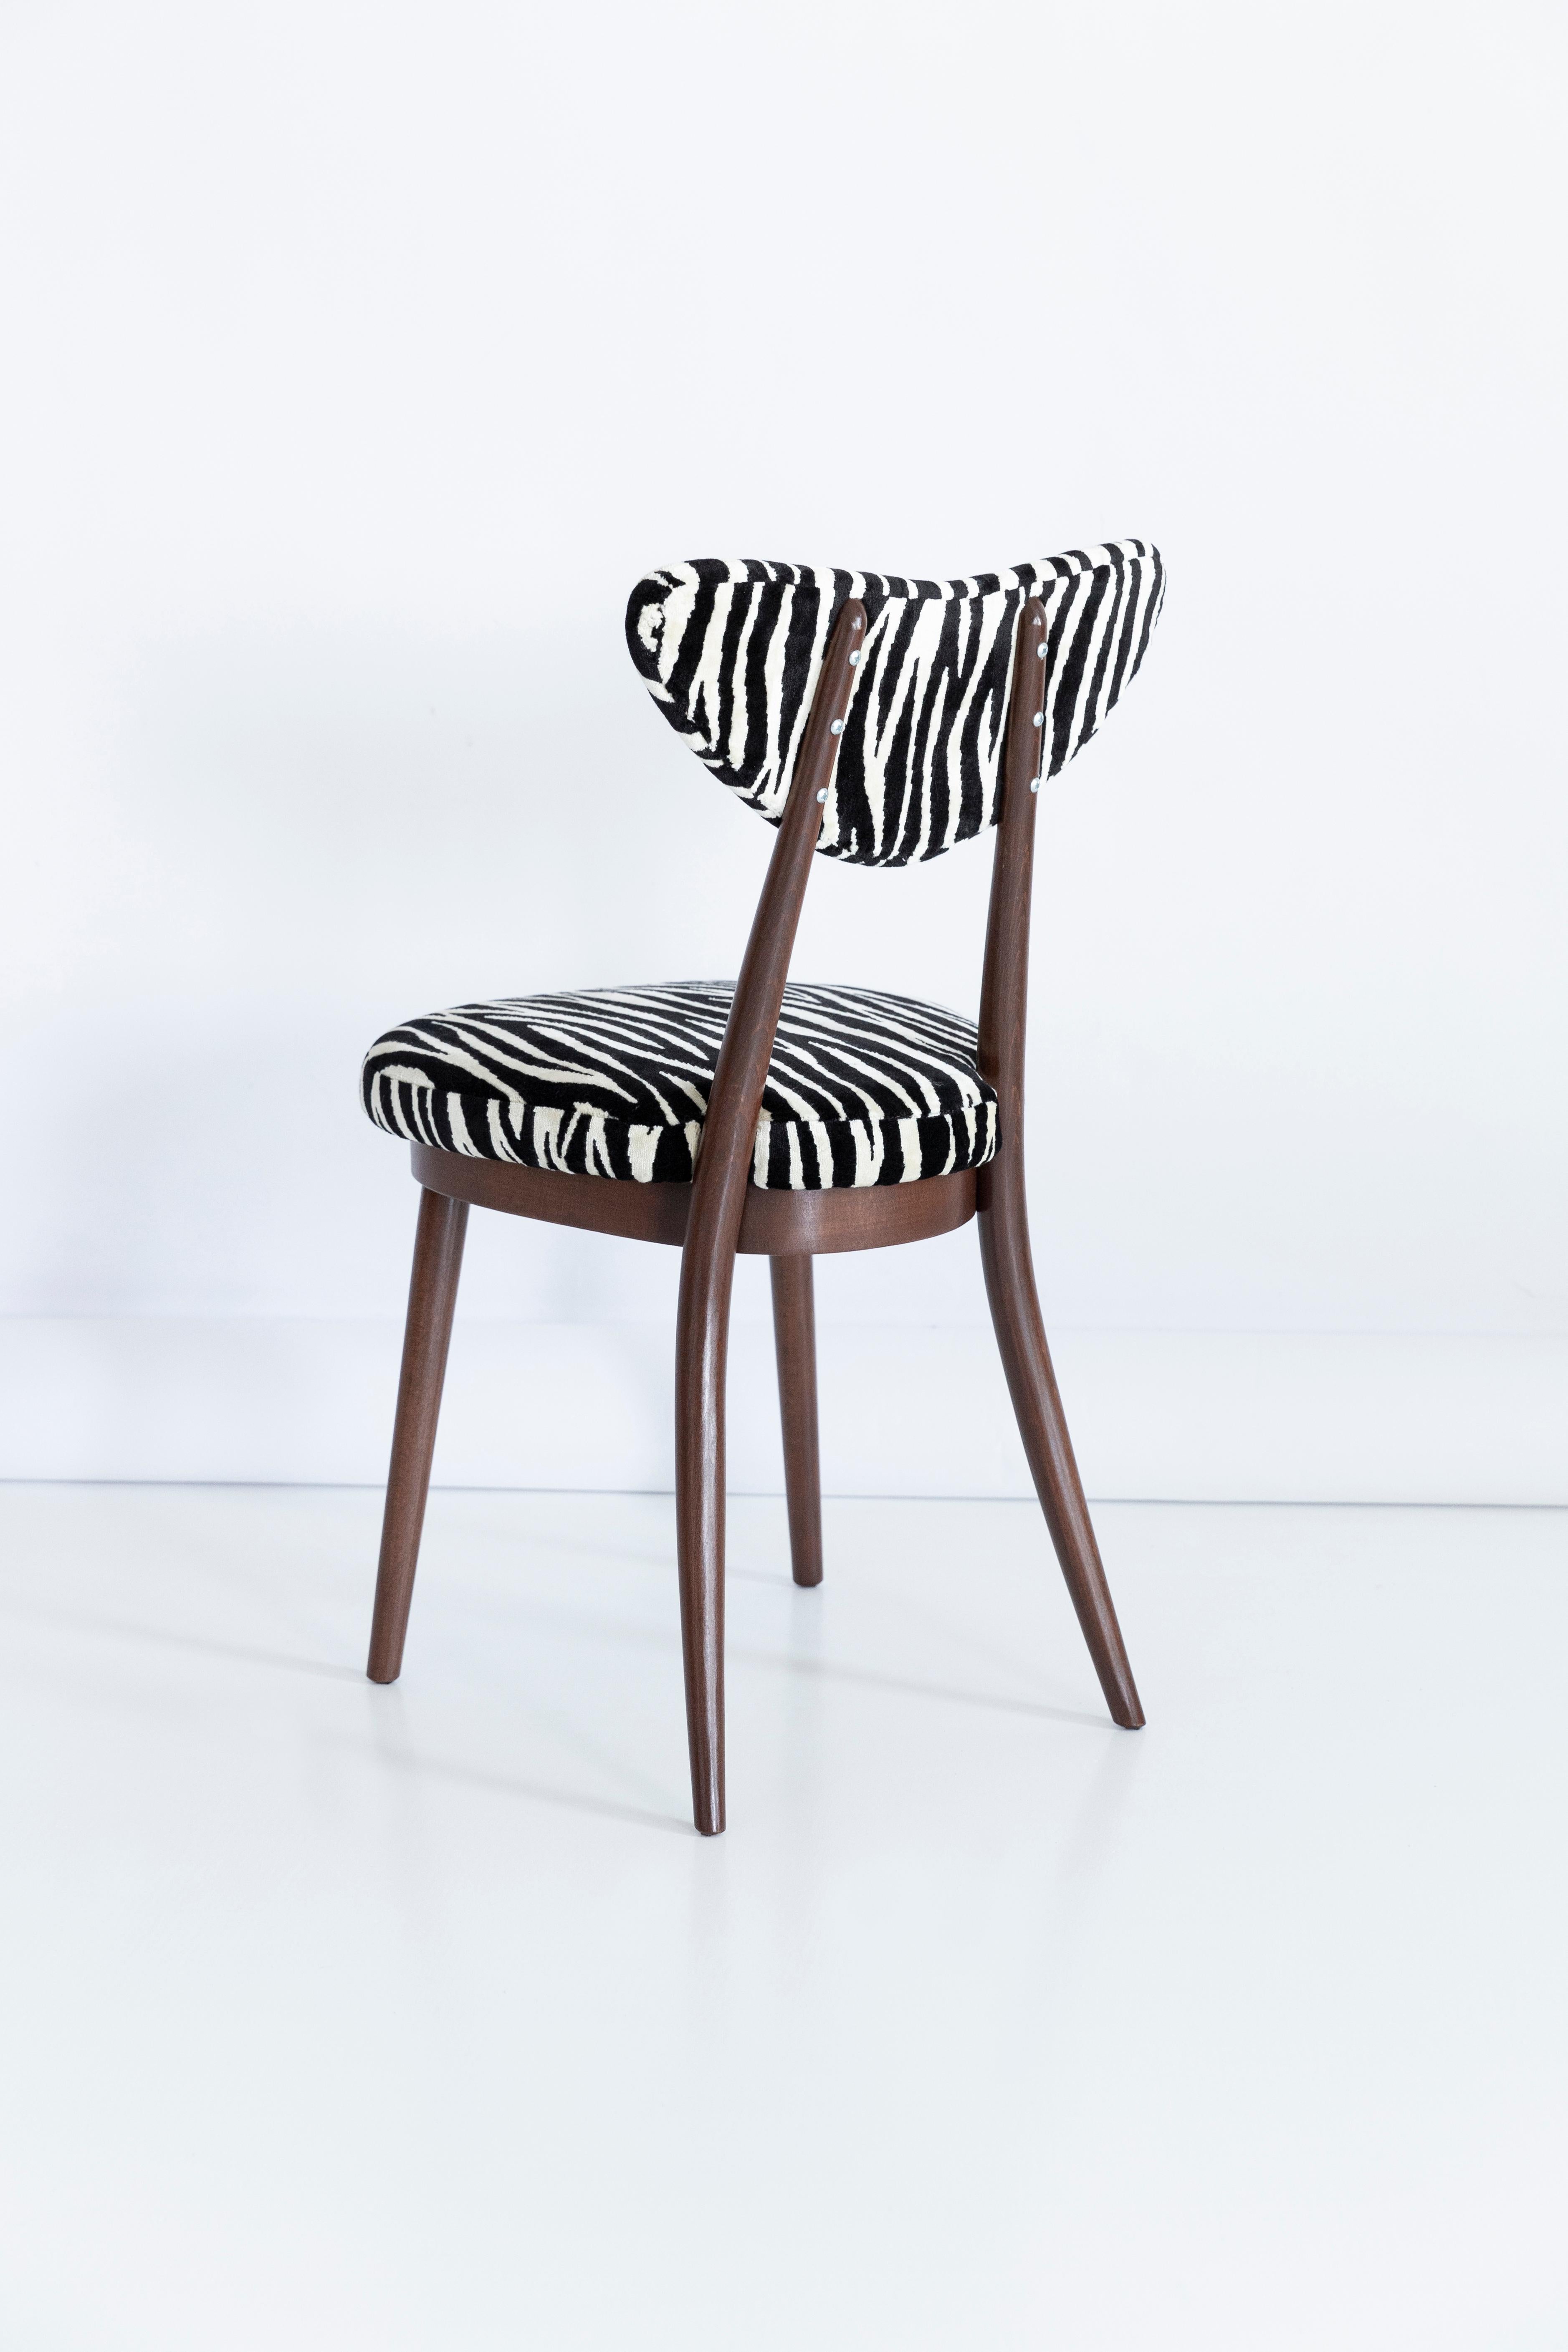 Set of Six Midcentury Zebra Black and White Heart Chairs, Poland, 1960s For Sale 1